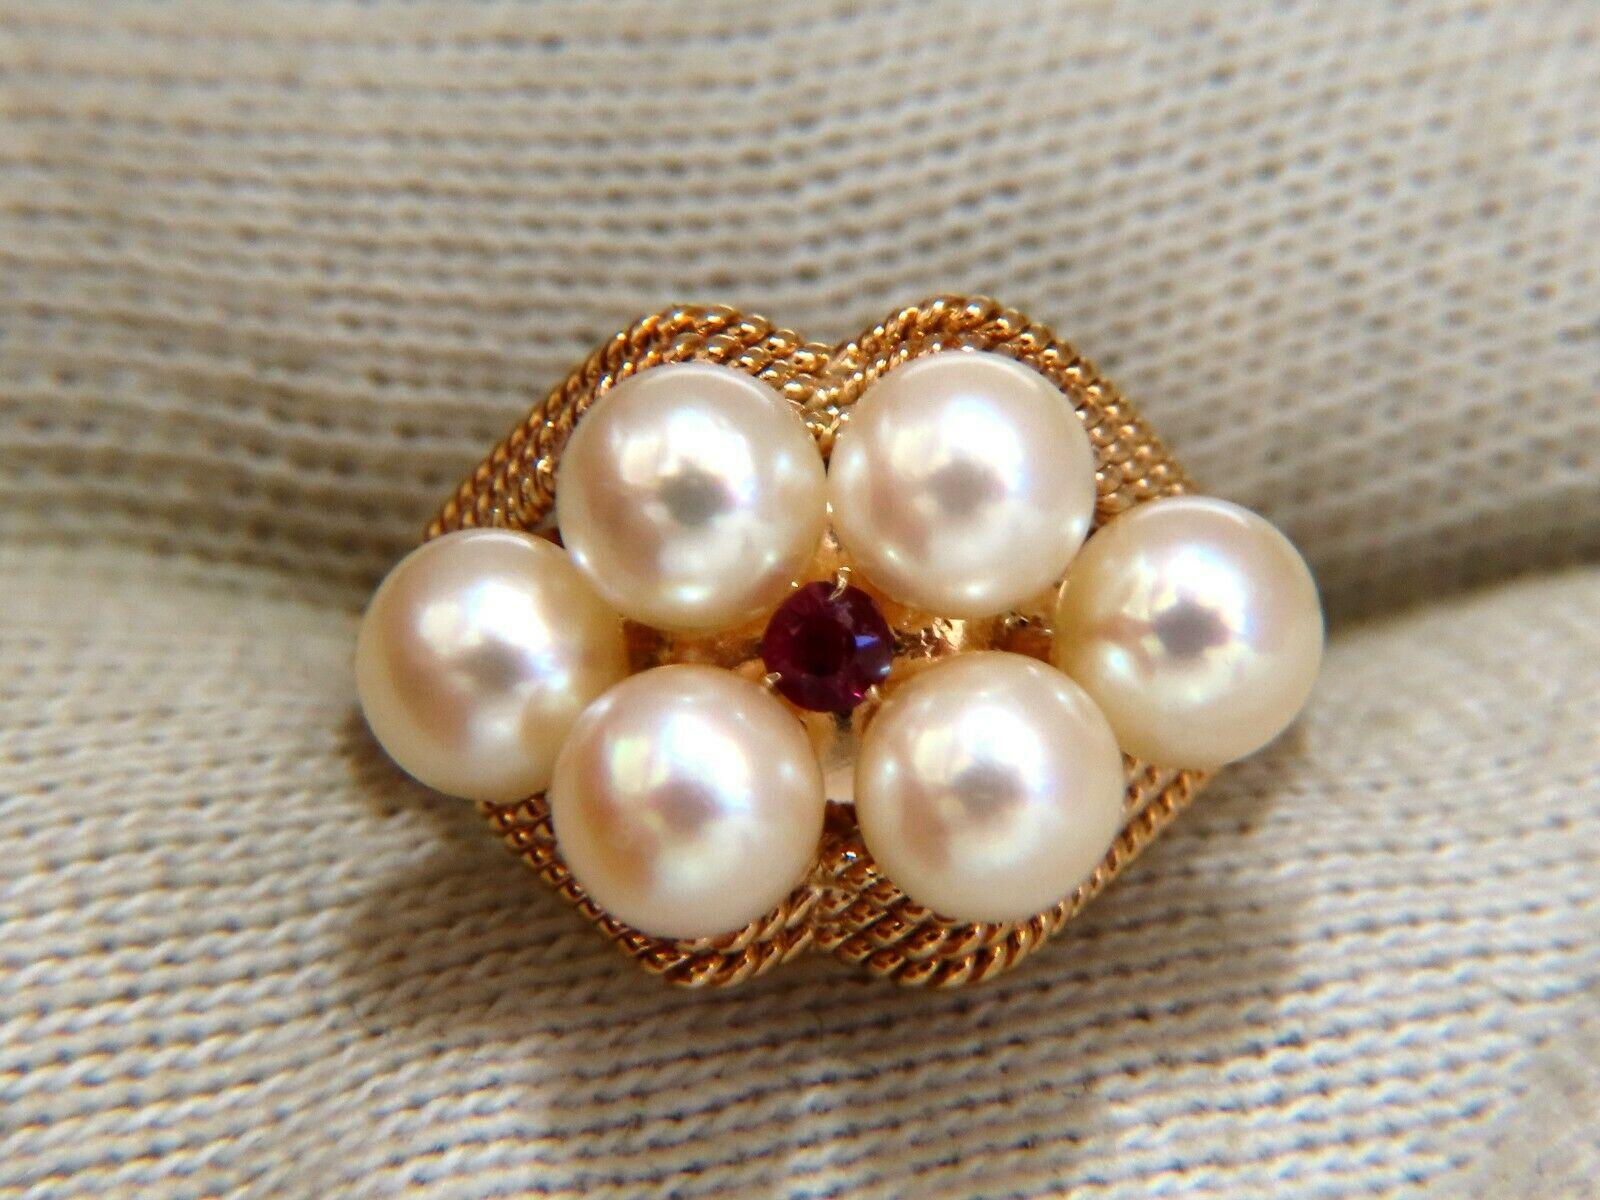 5mm Akoya Cream  Pearls Ring

.02ct Natural Round Ruby

14kt. yellow gold

3.9 grams.

Current ring size: 4.5

We may resize.

Ring: 12.8mm Wide

Depth of ring: 8.8mm